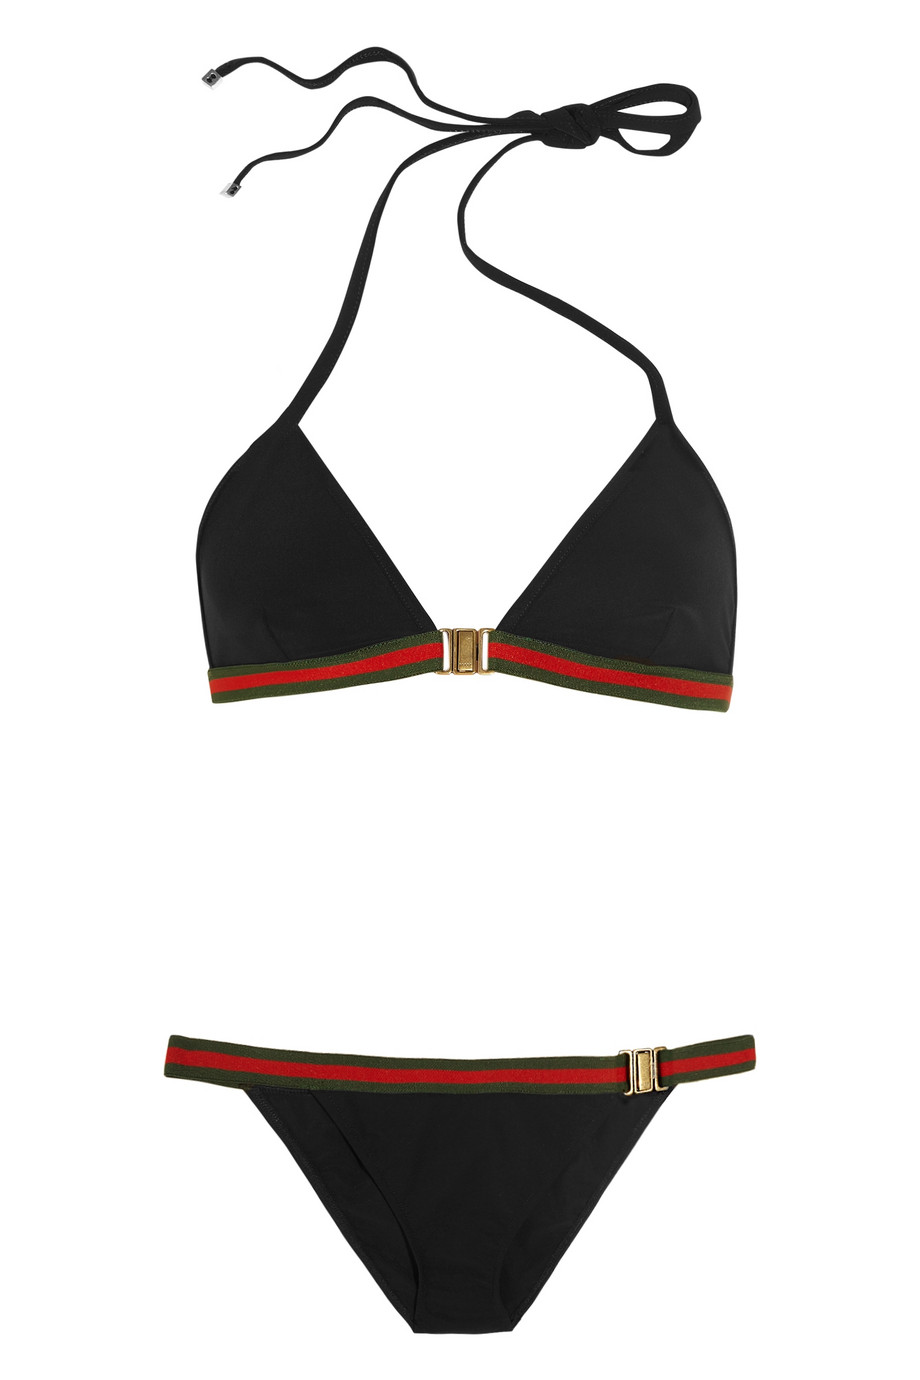 gucci bathing suit two piece